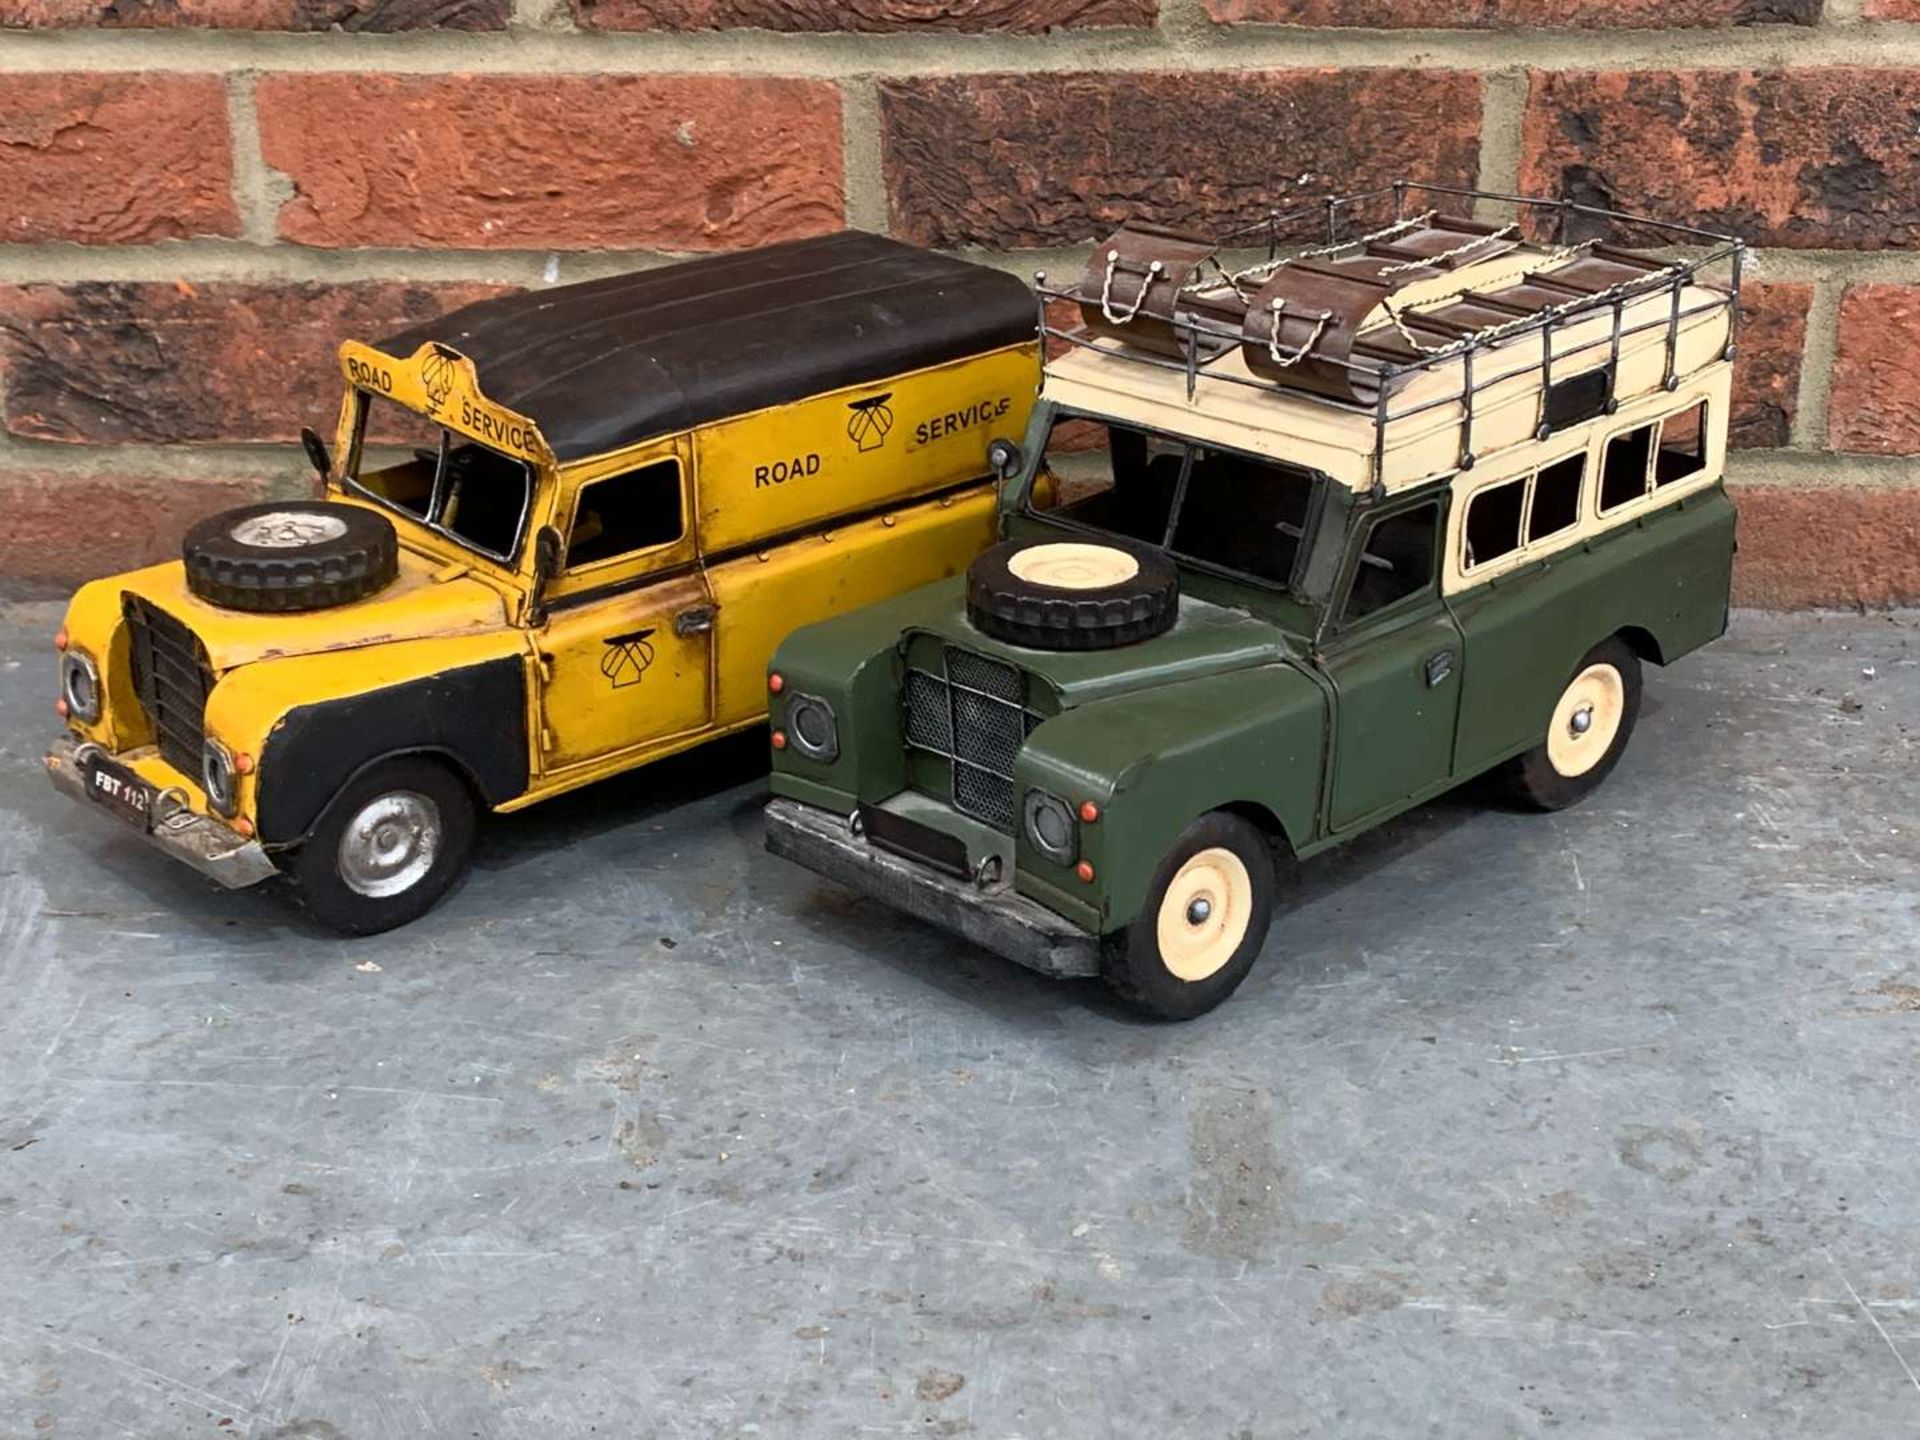 Two Modern Metal Land Rover Model Cars - Image 3 of 3